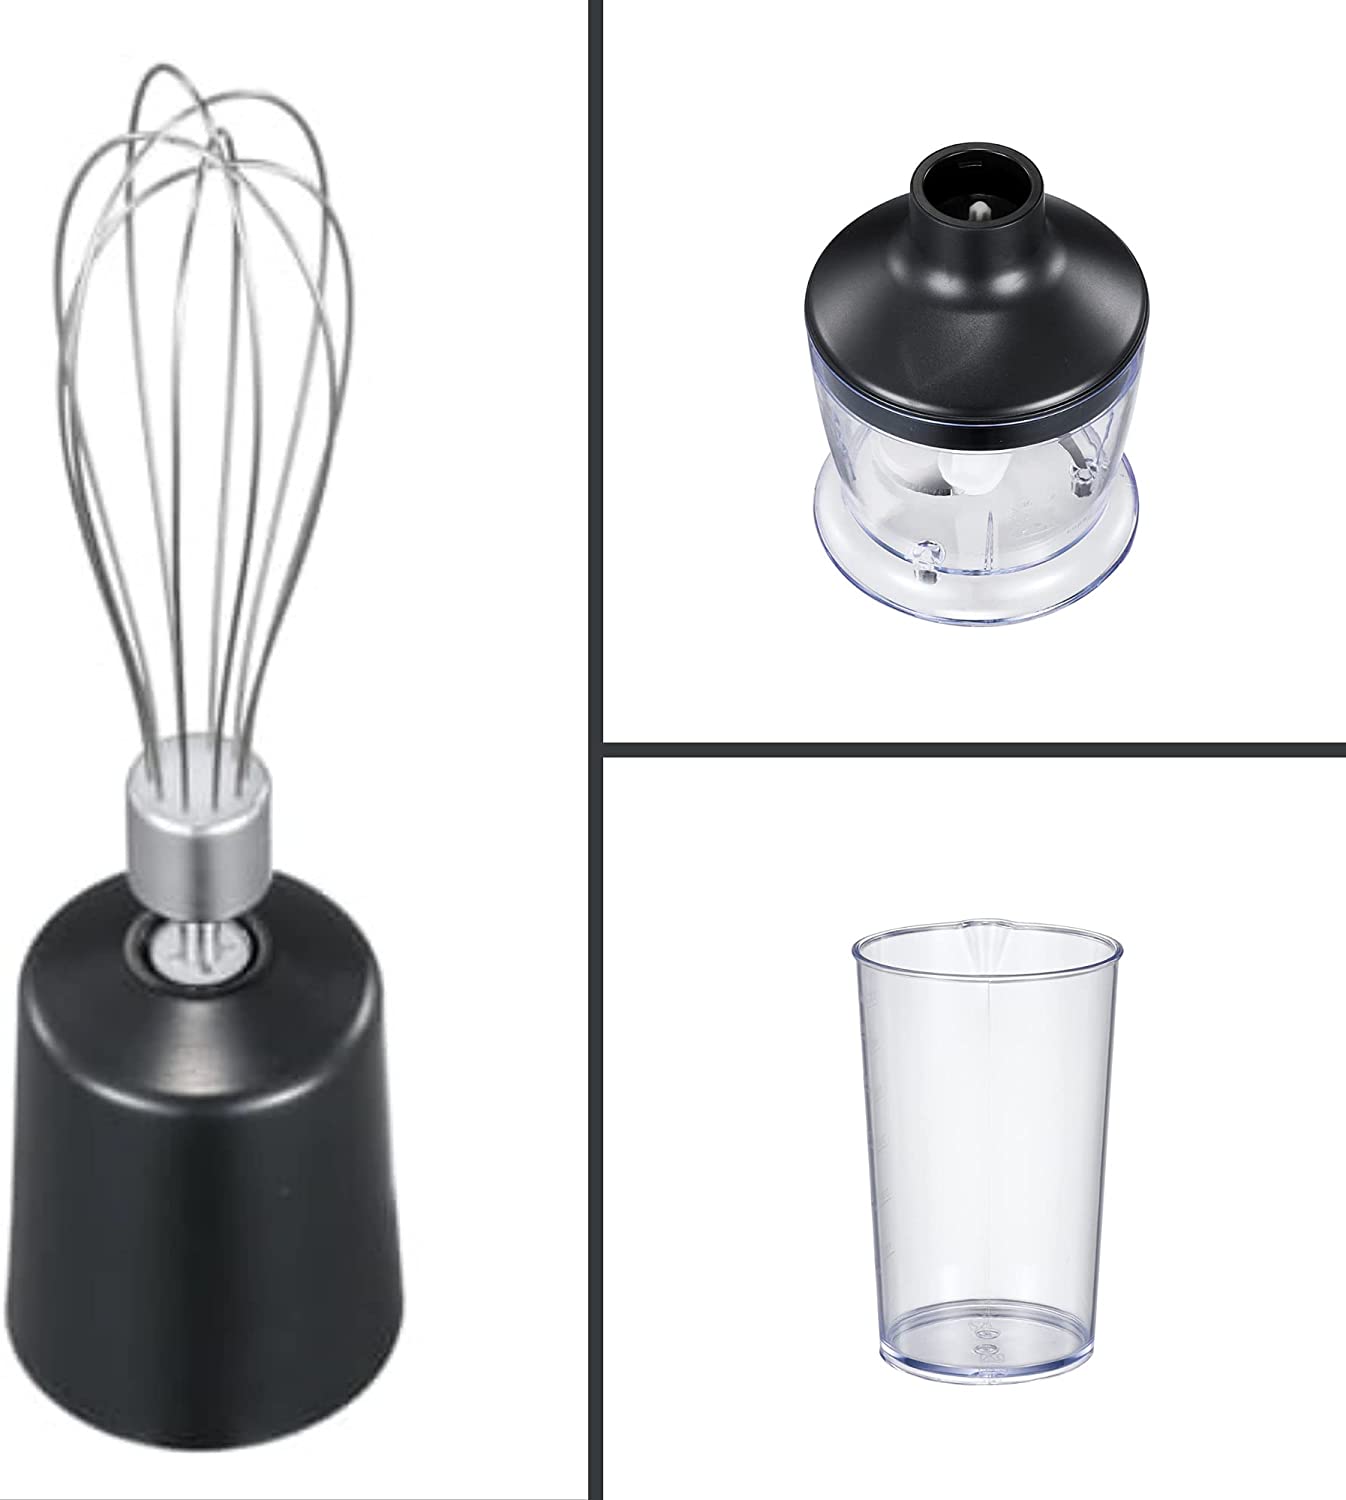 *600W 4-in-1 Stainless Steel Hand Blender with Chopper and Whisk